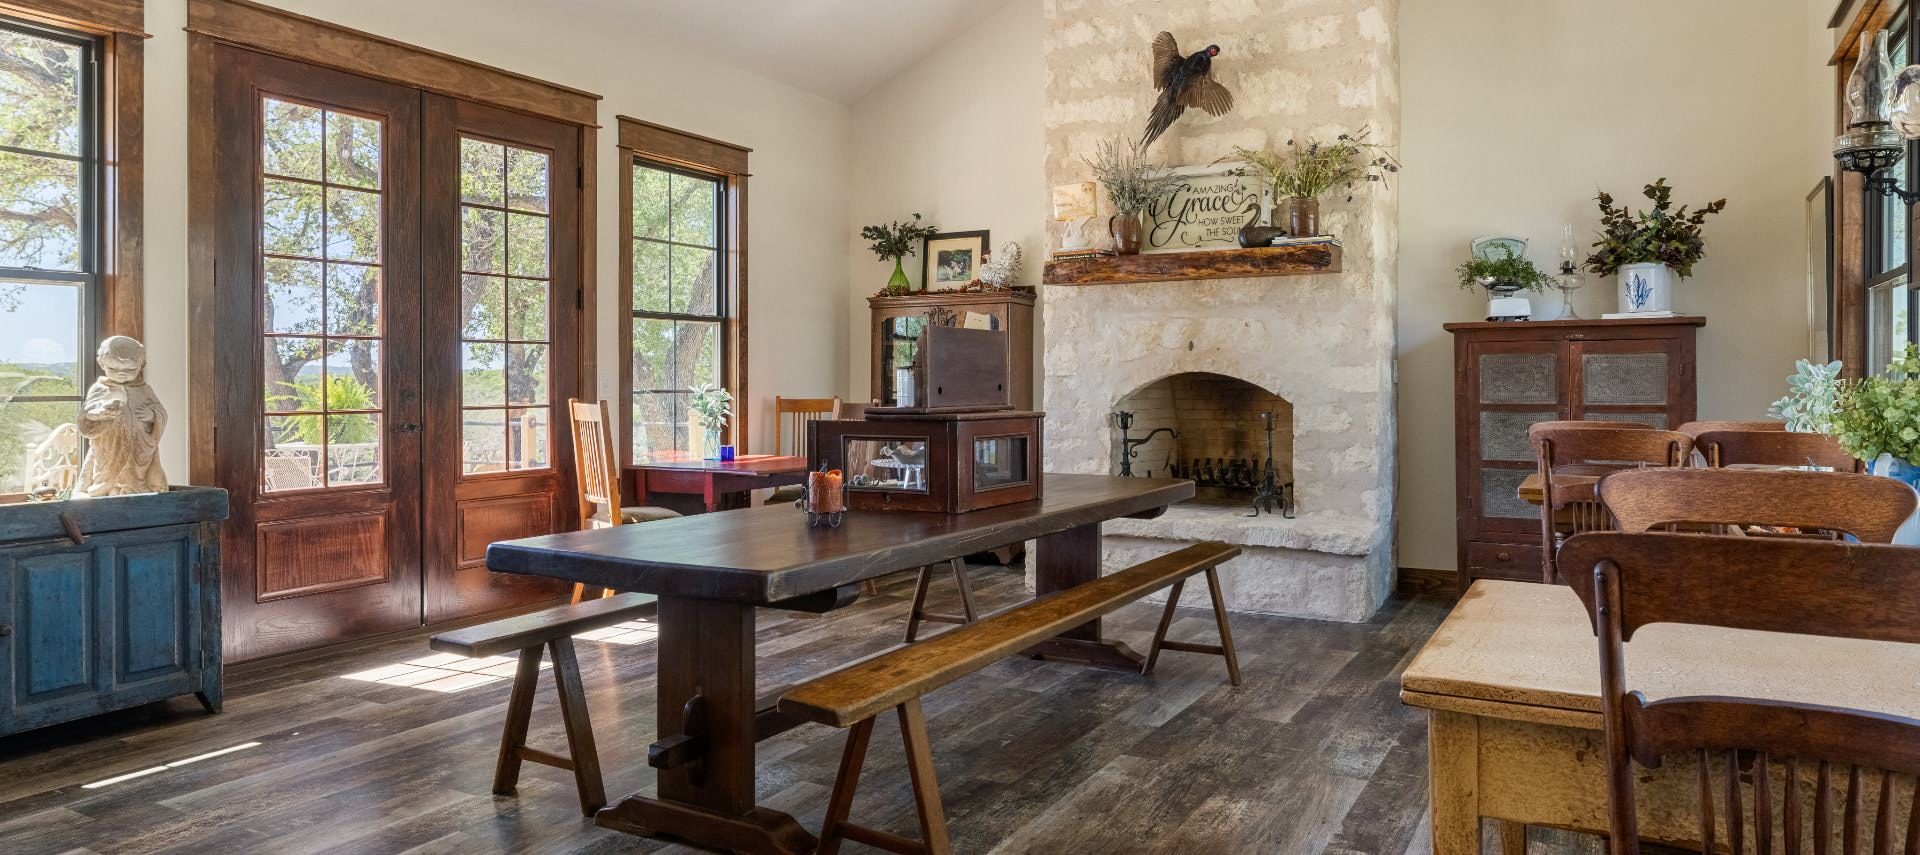 Large dining area with hardwood flooring, stone fireplace, dark wooden picnic table, small wooden tables and chairs, and views to the outside